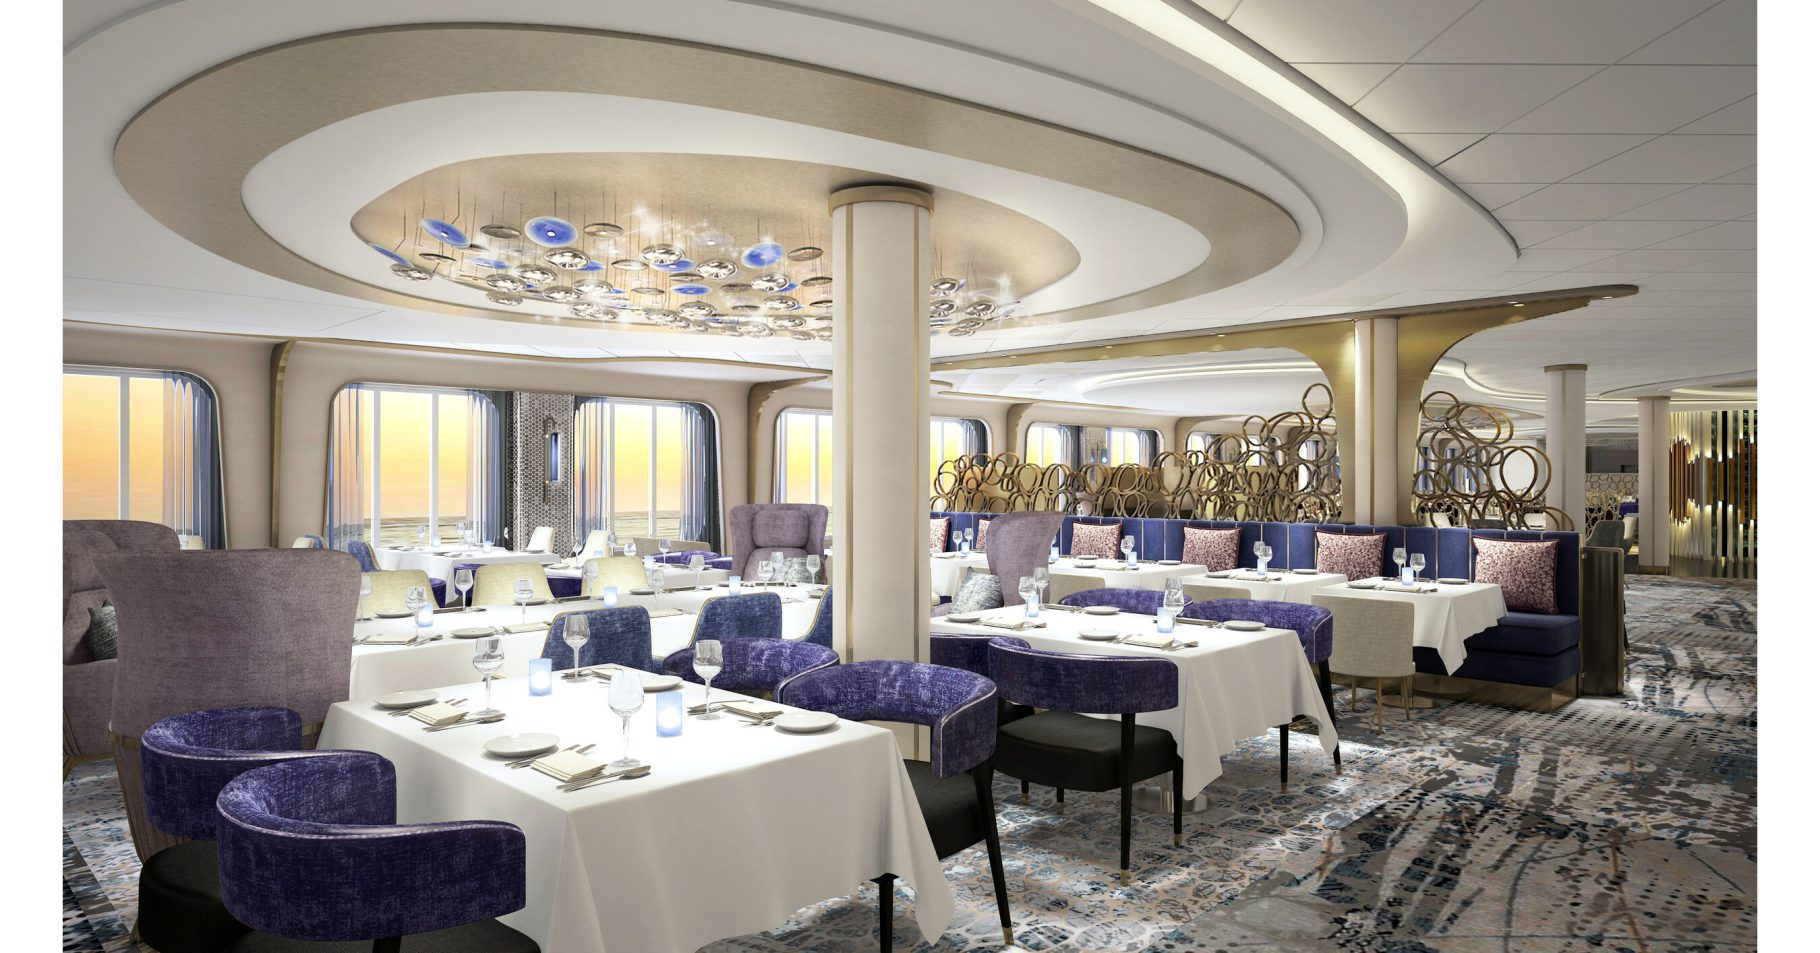 Celebrity Ascent will feature a redesigned Cosmopolitan restaurant inspired by the culture of champagne